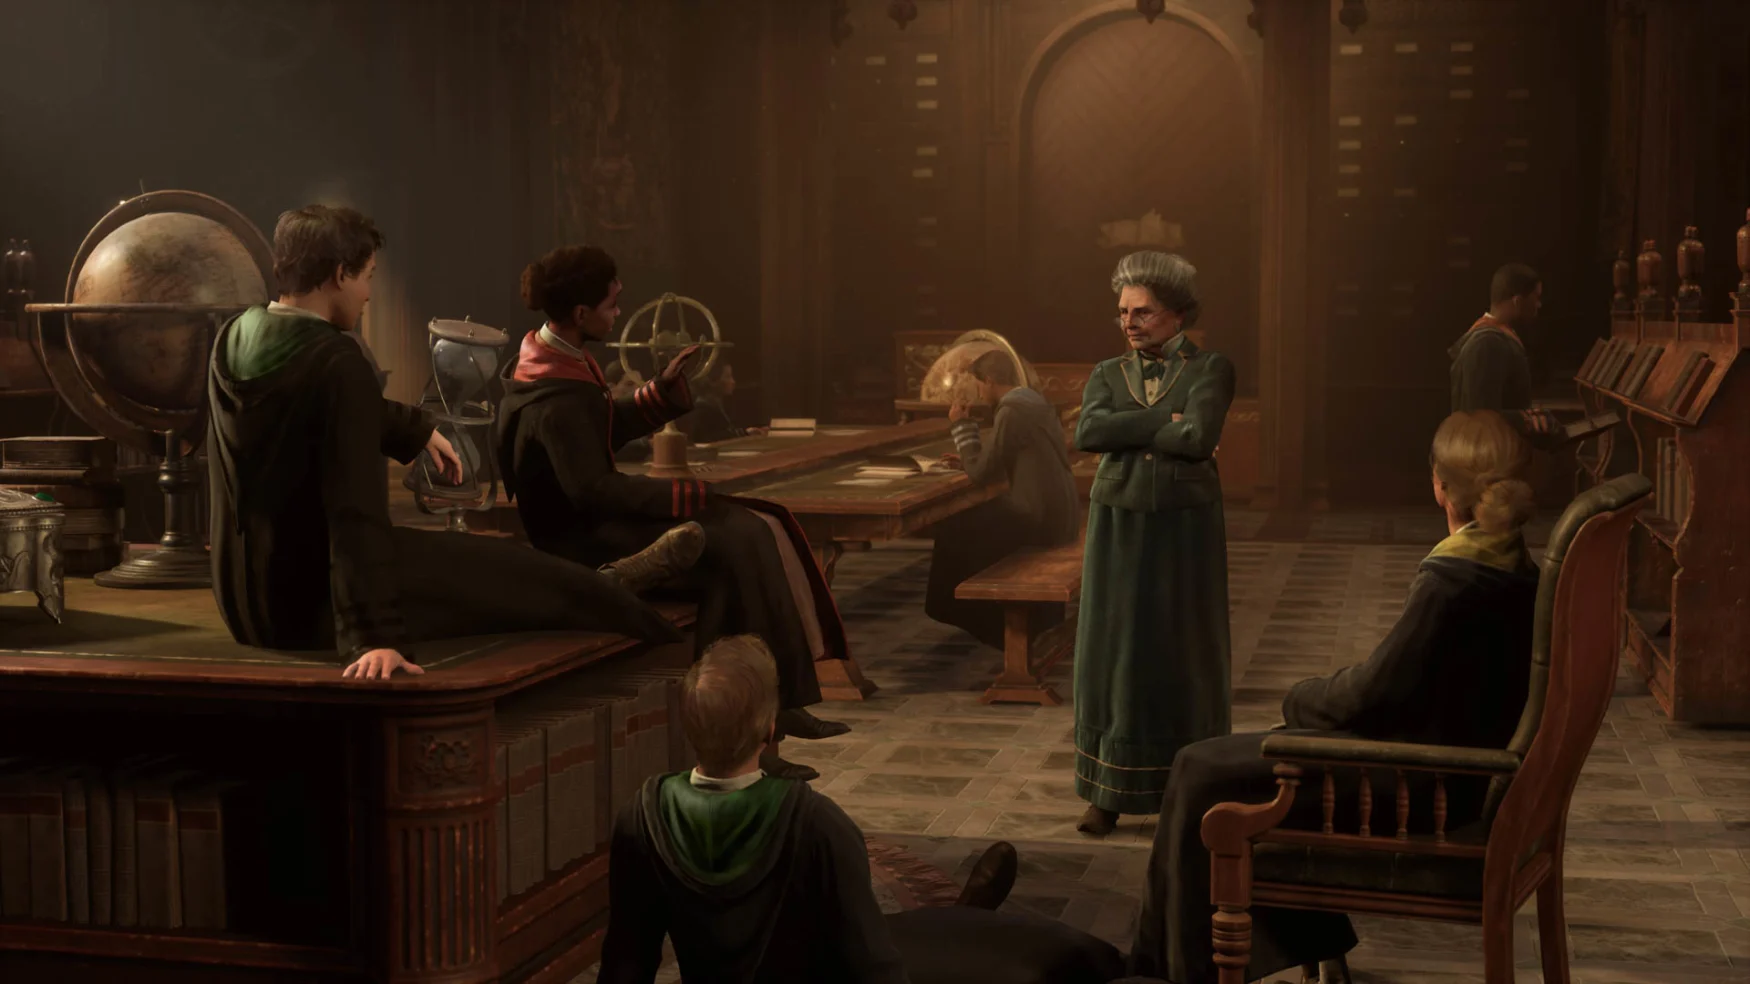 Hogwarts Legacy – News, Reviews, Videos, and More